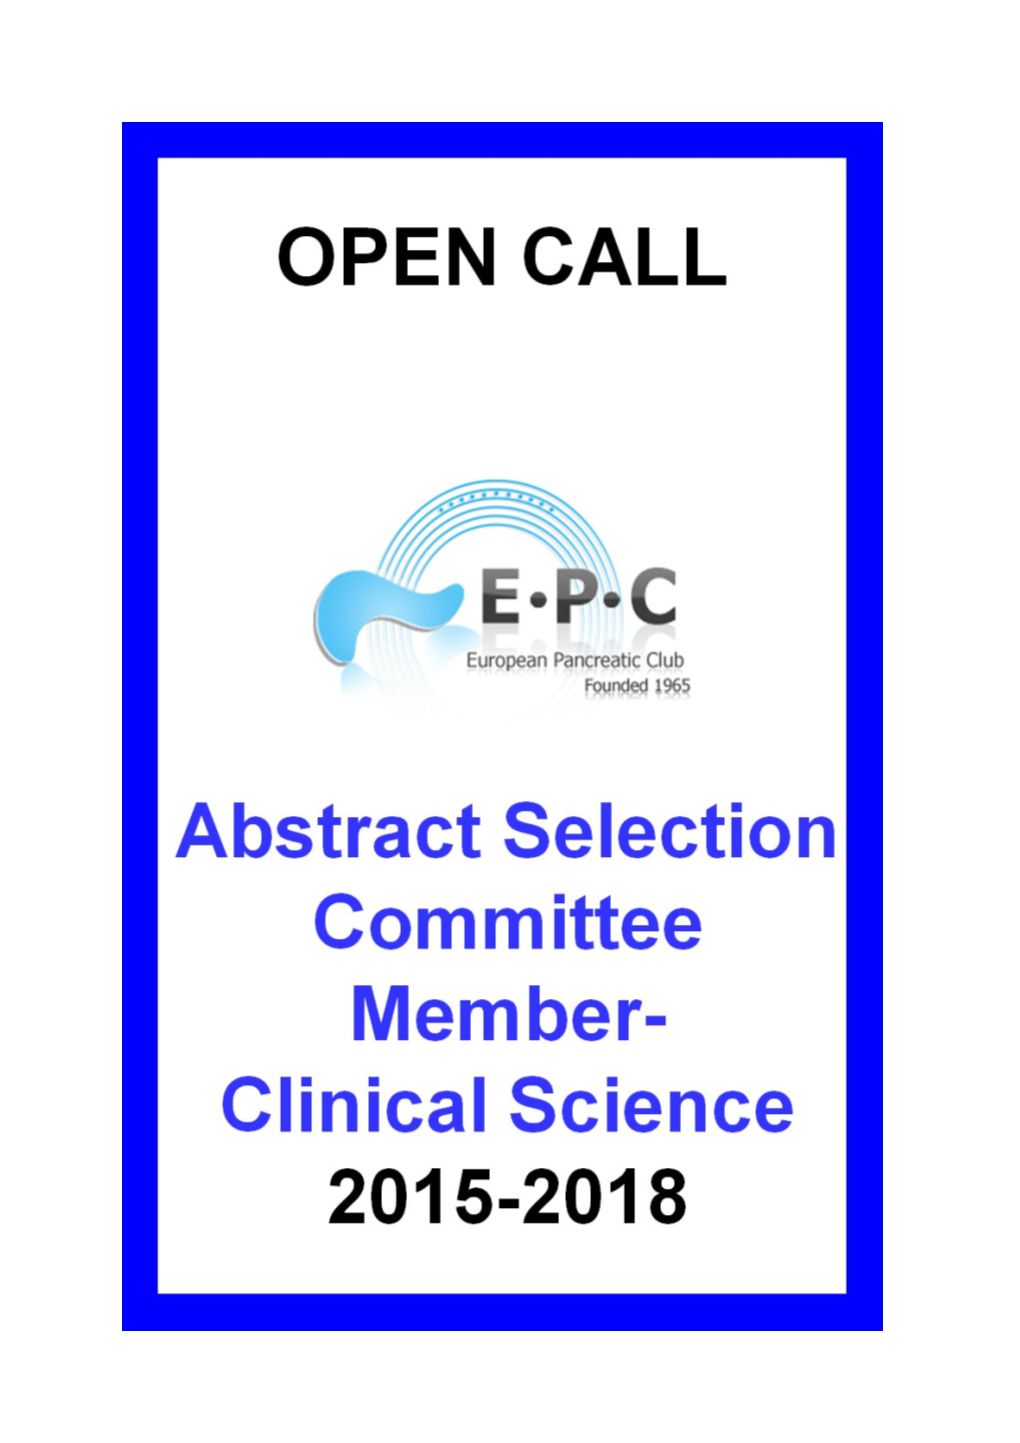 For Abstract Selection Committee Members (Representing Clinical Science) at the European